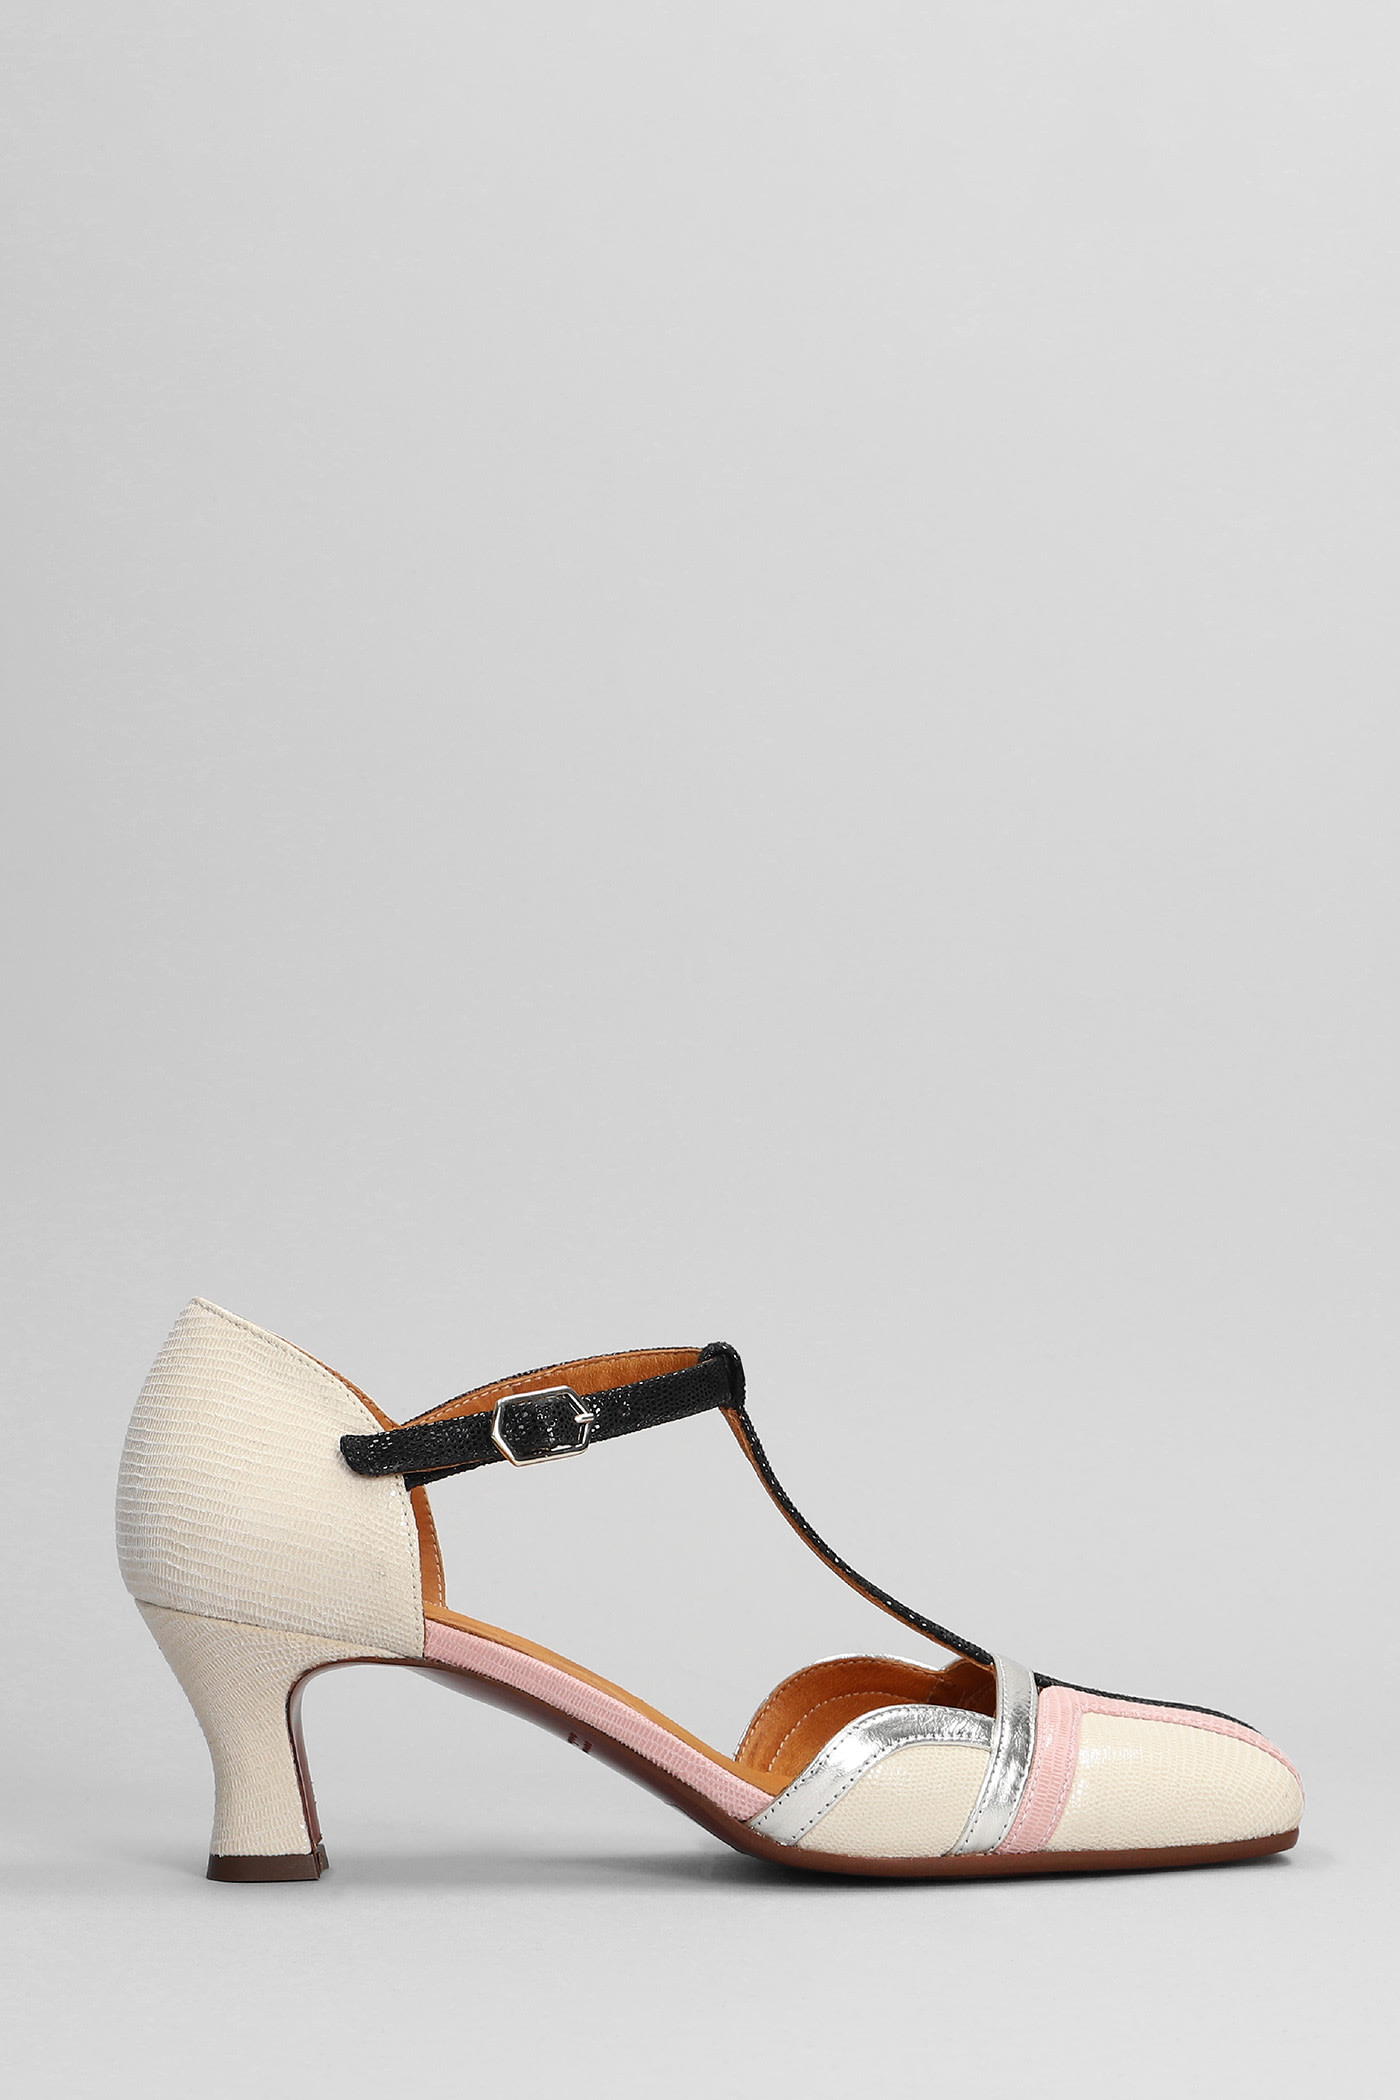 Chie Mihara Valai Sandals In Beige Leather